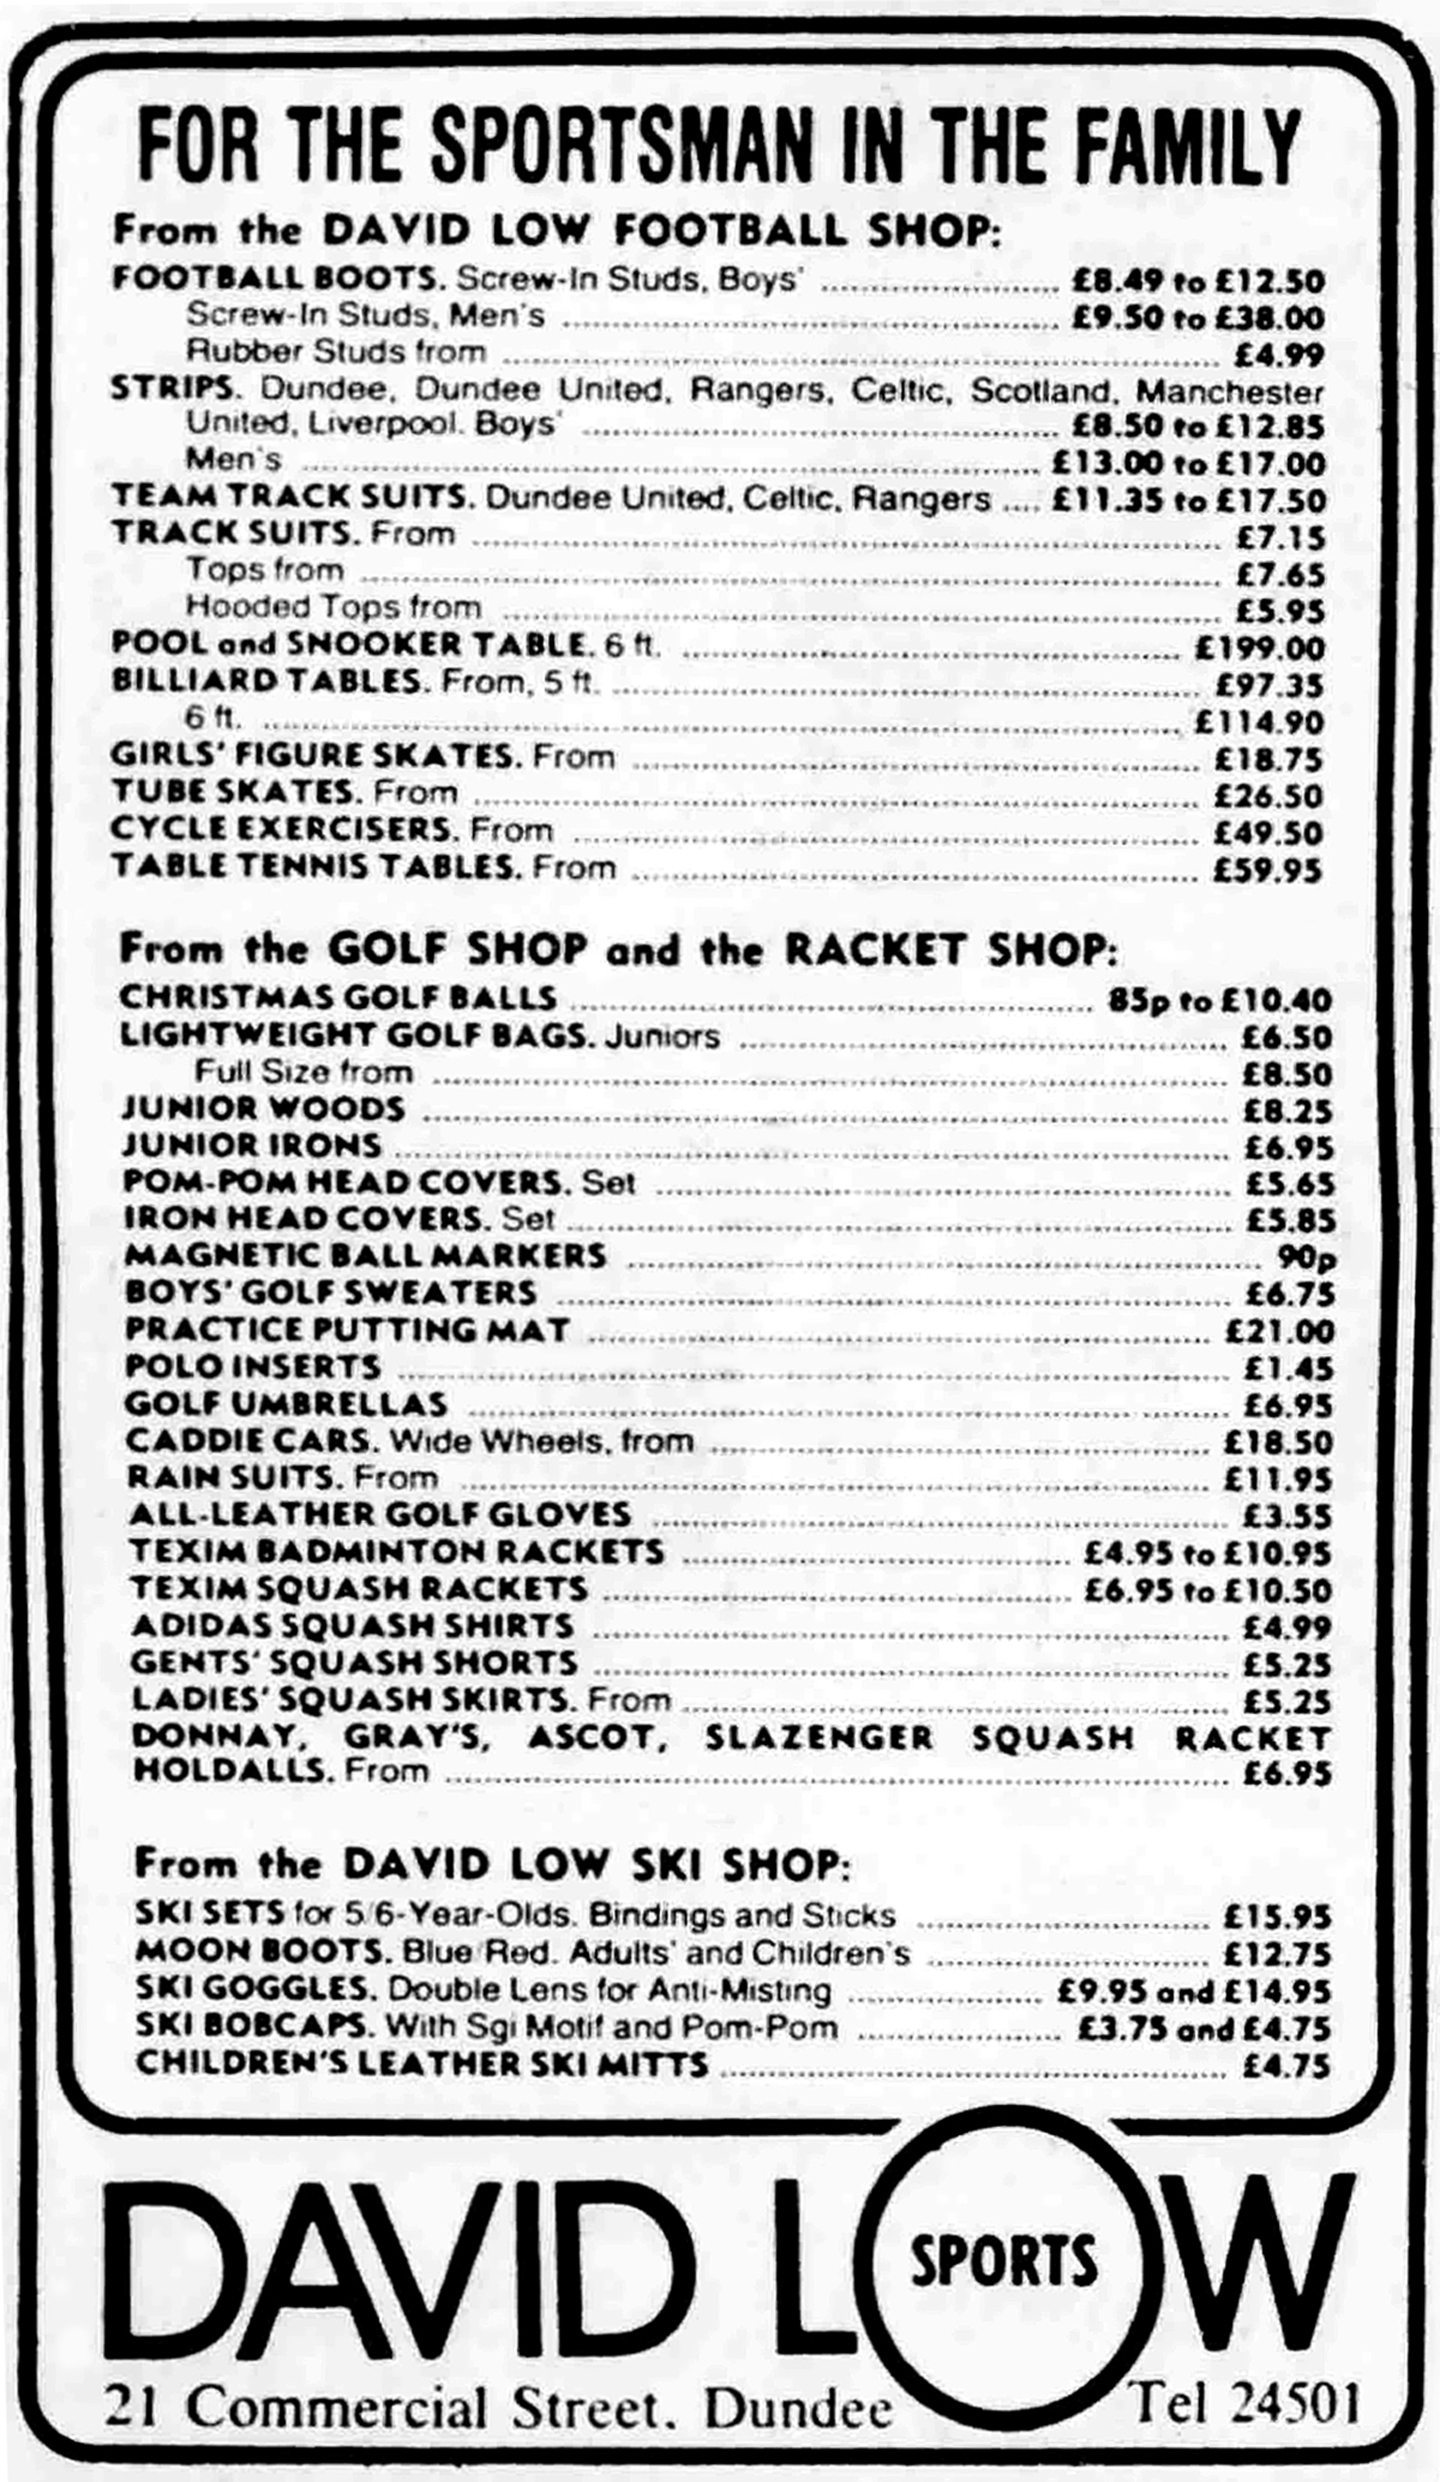 A David Low price list being advertised in 1979. 